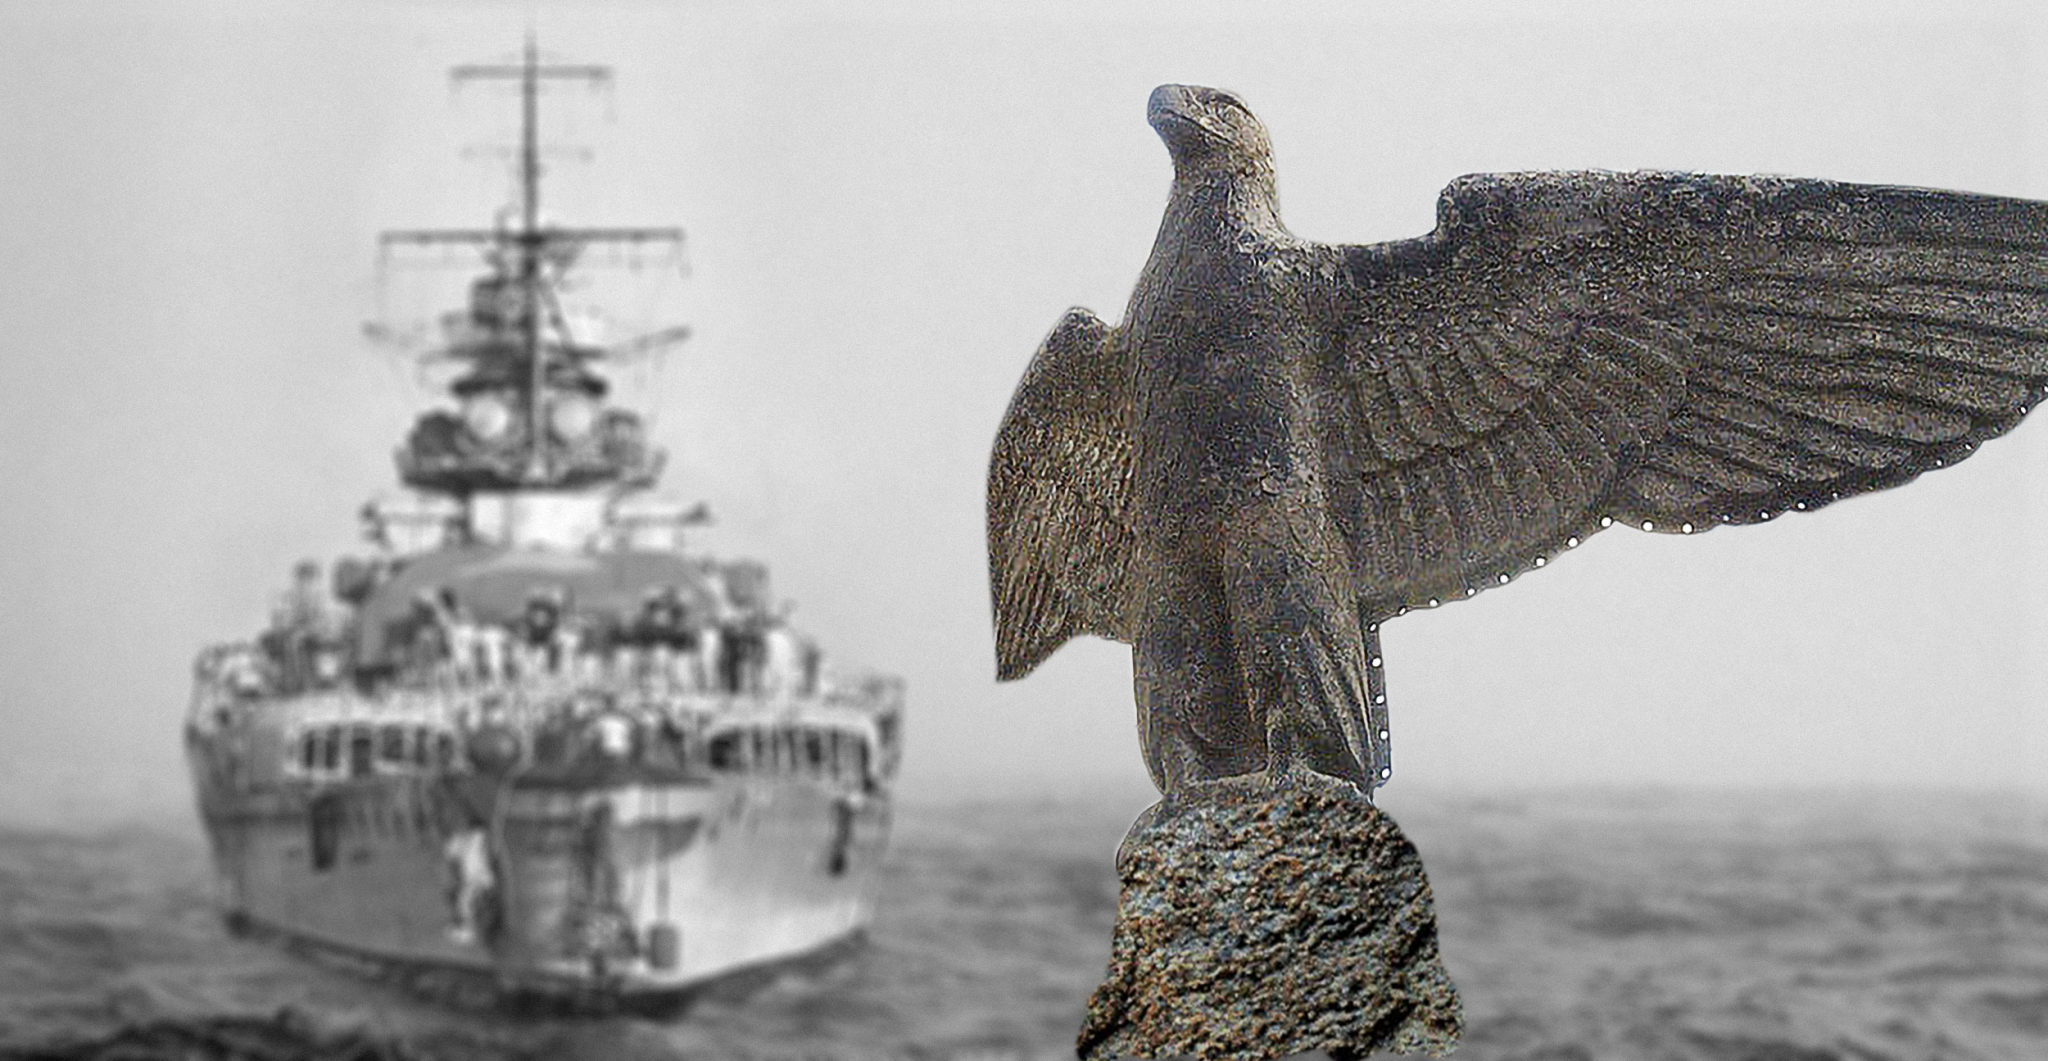 The  bronze eagle, recovered from a German battleship Graf Spee.